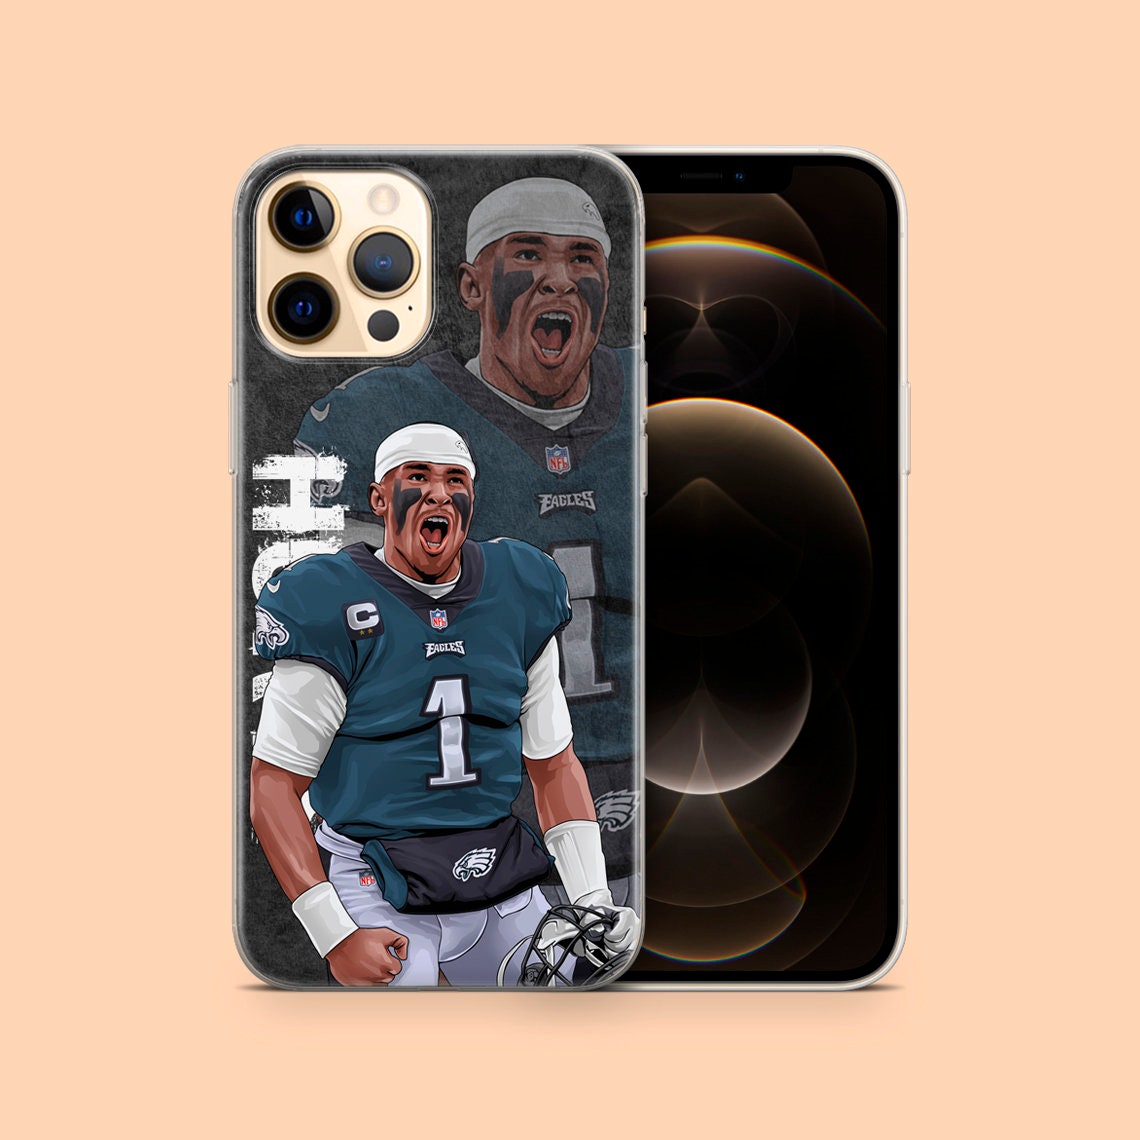 6ers Phillies Flyers Eagles,Designer iPhone Case for Sale by CHERYLDIAL